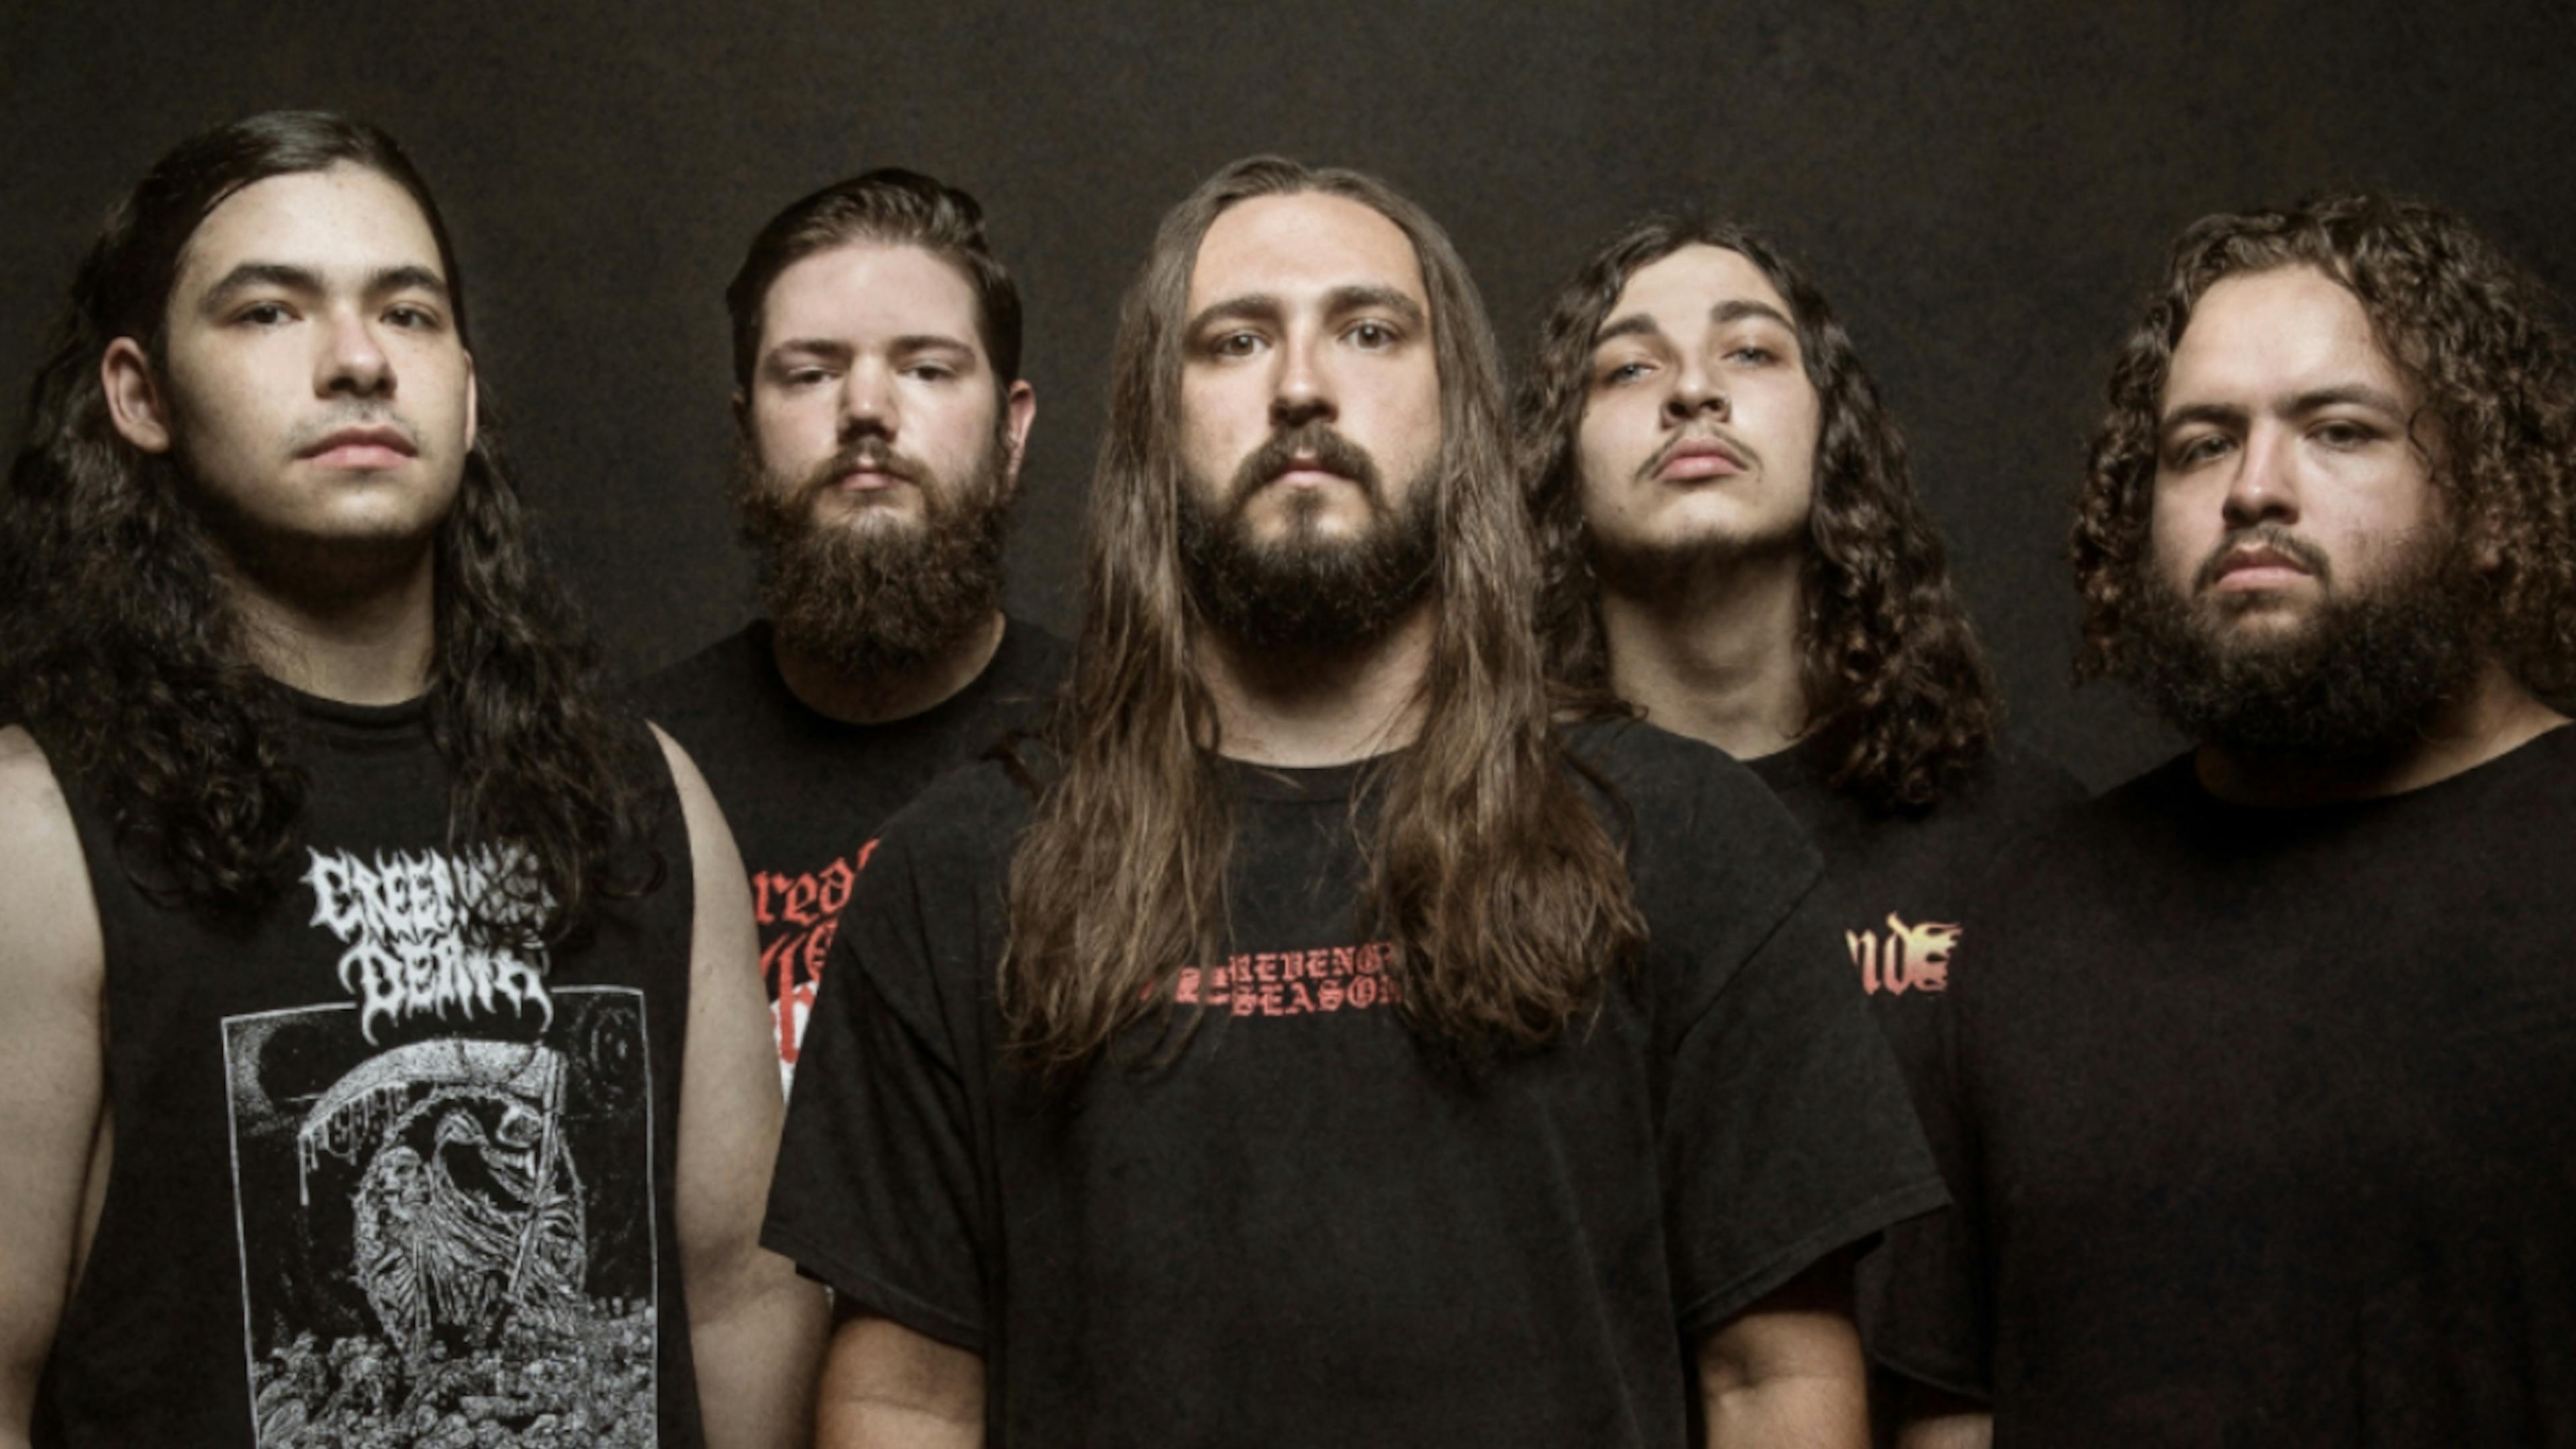 EXCLUSIVE: I Am Premiere Their Video For New Texas Death Metal Track, Burn Slow